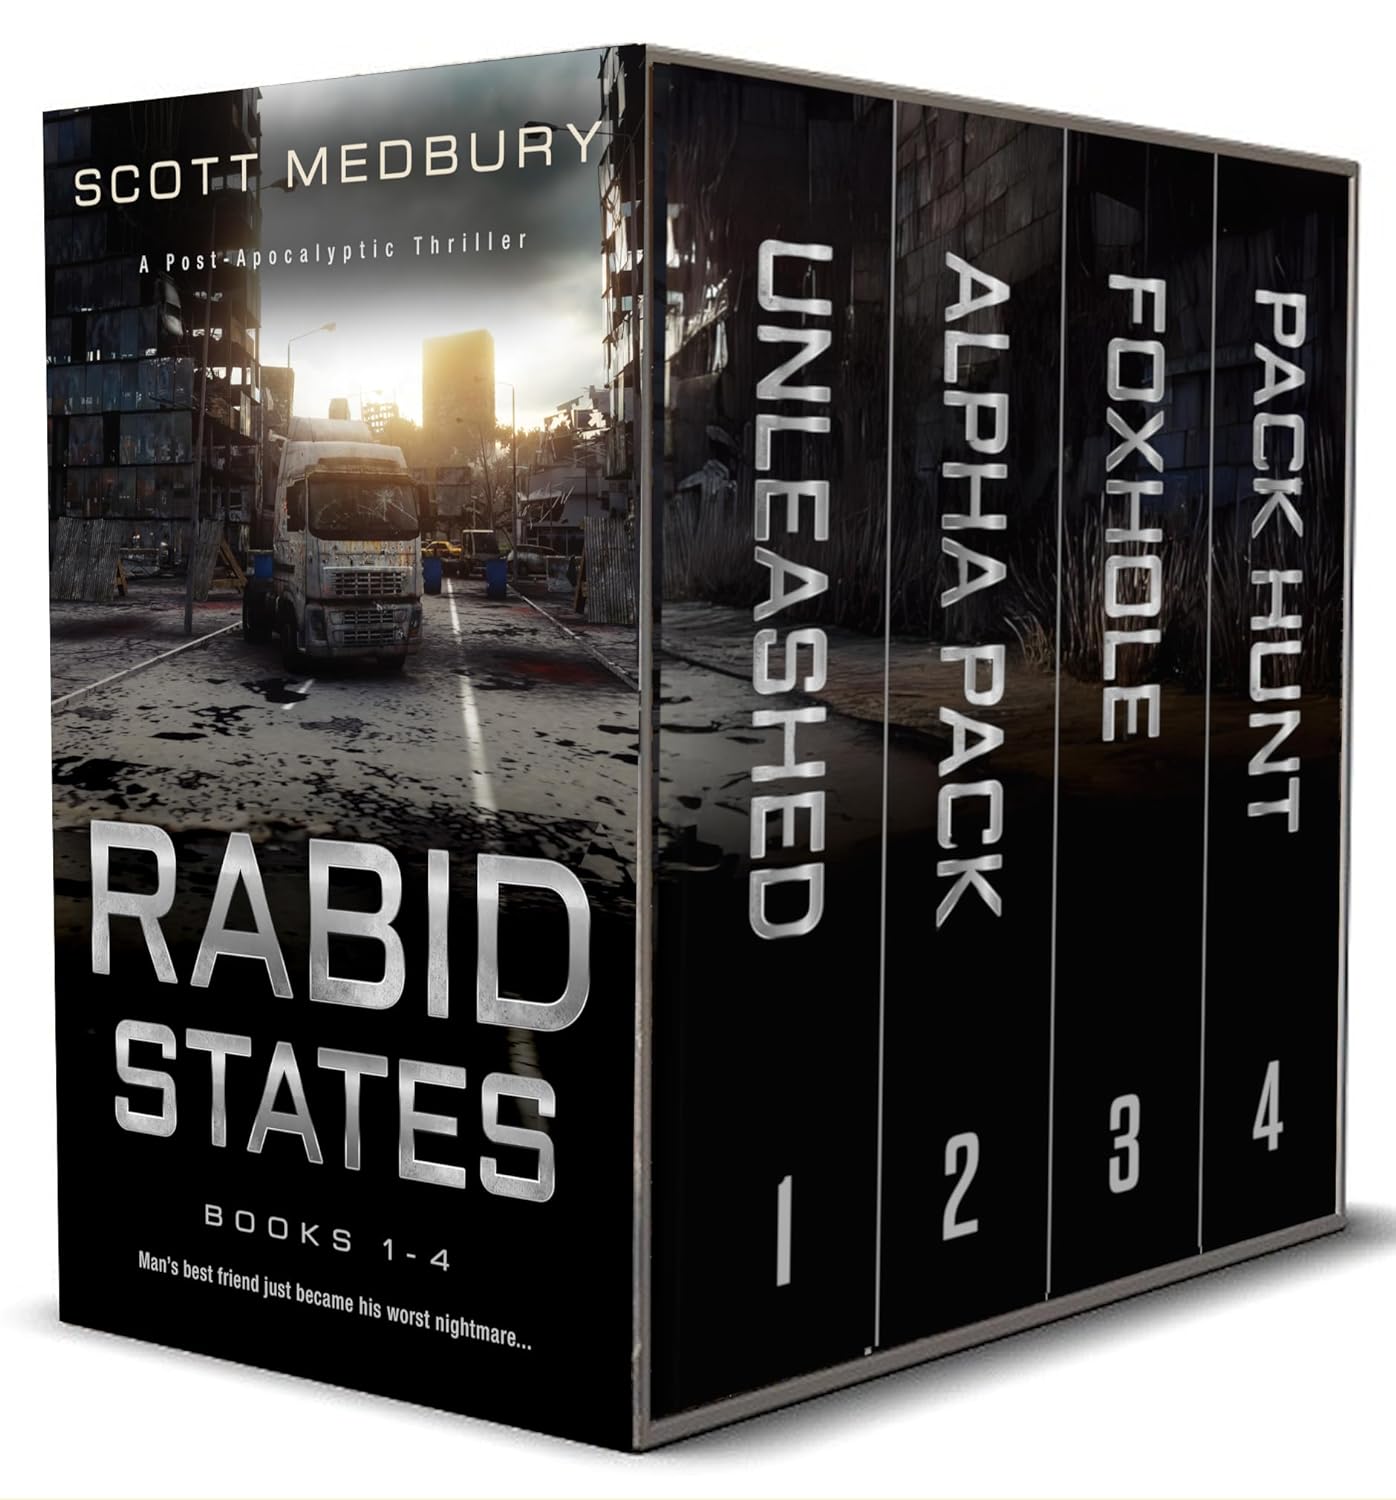 Rabid States: Books 1-4: The Complete Series is free on Amazon Kindle